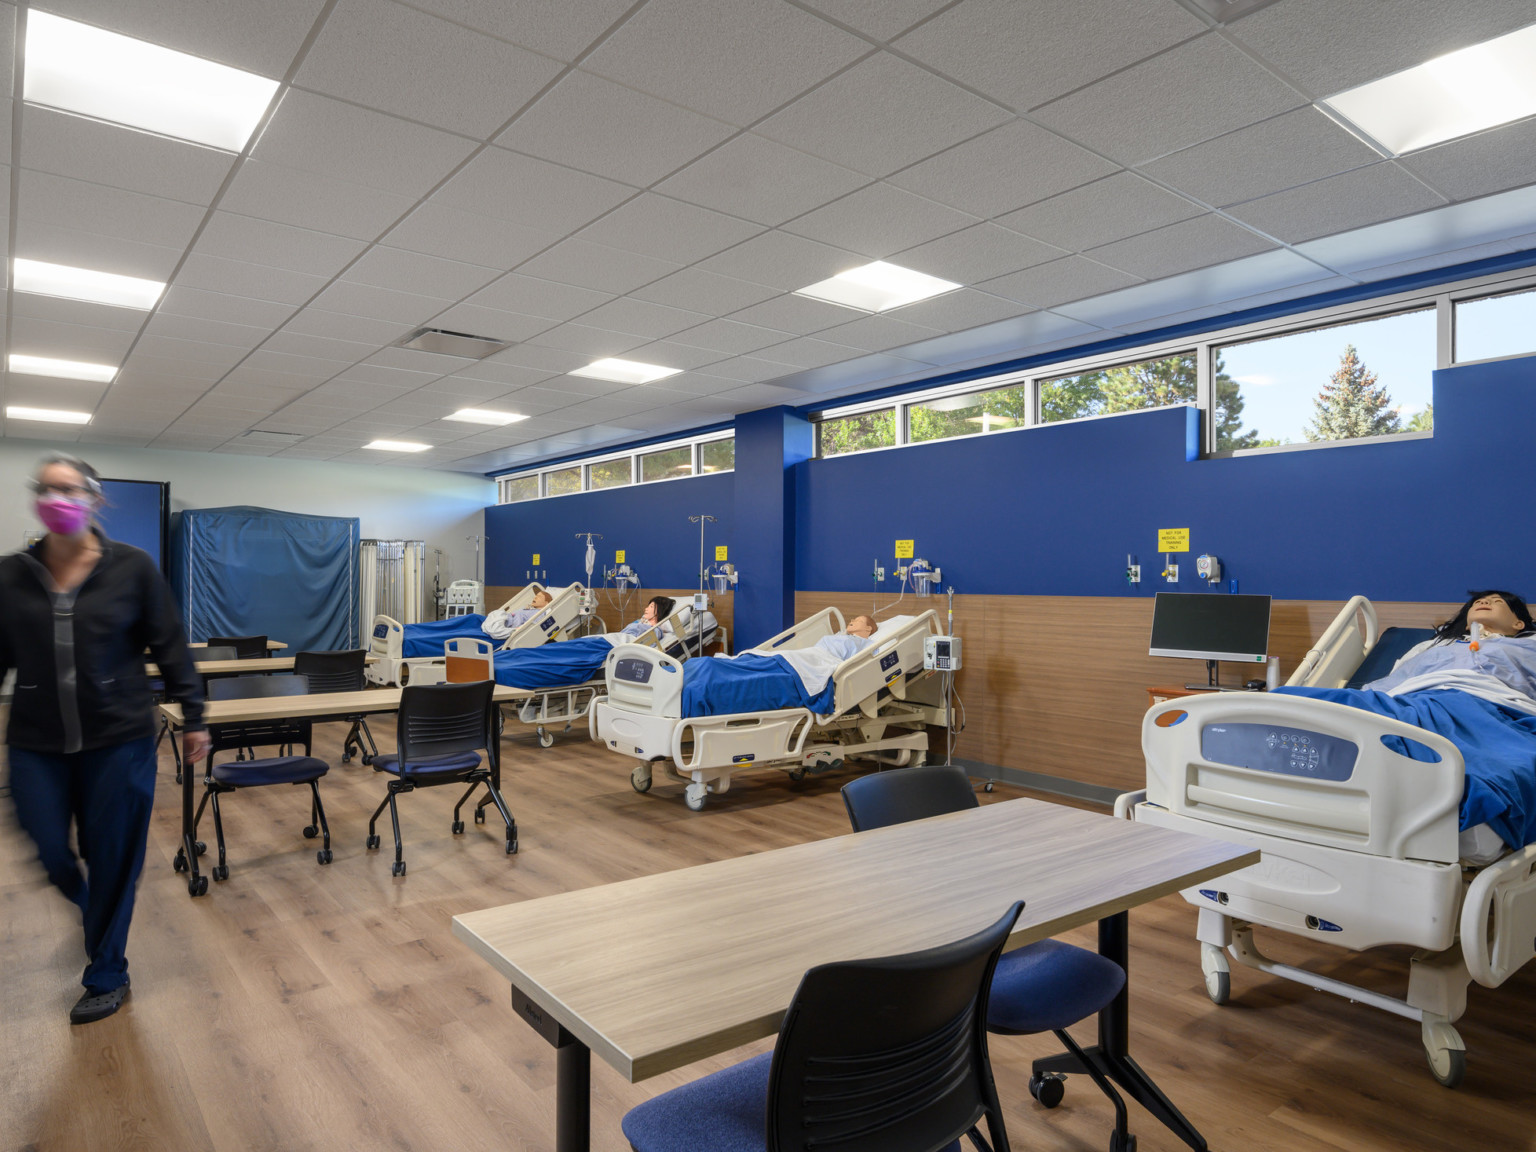 Hospital beds with dummies along wood wall with window lined blue accent upper half. Tables in front of beds on wood floor